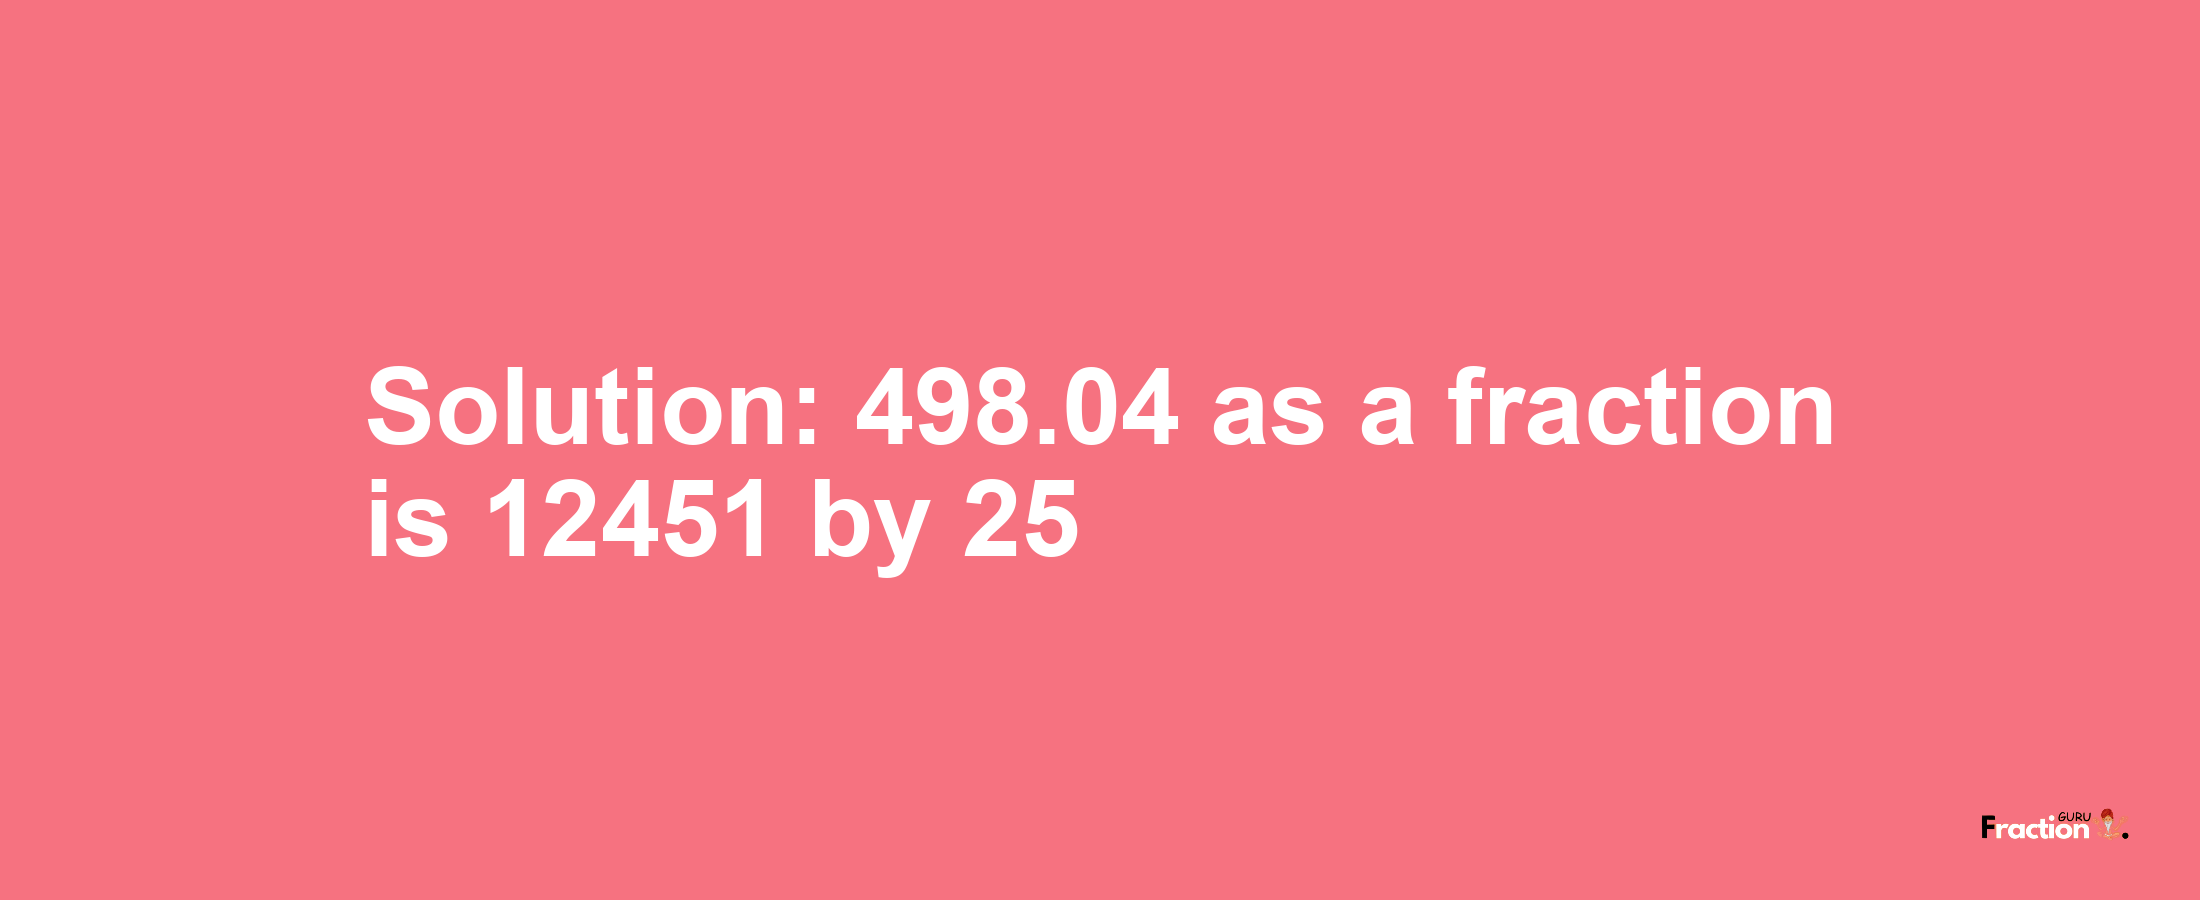 Solution:498.04 as a fraction is 12451/25